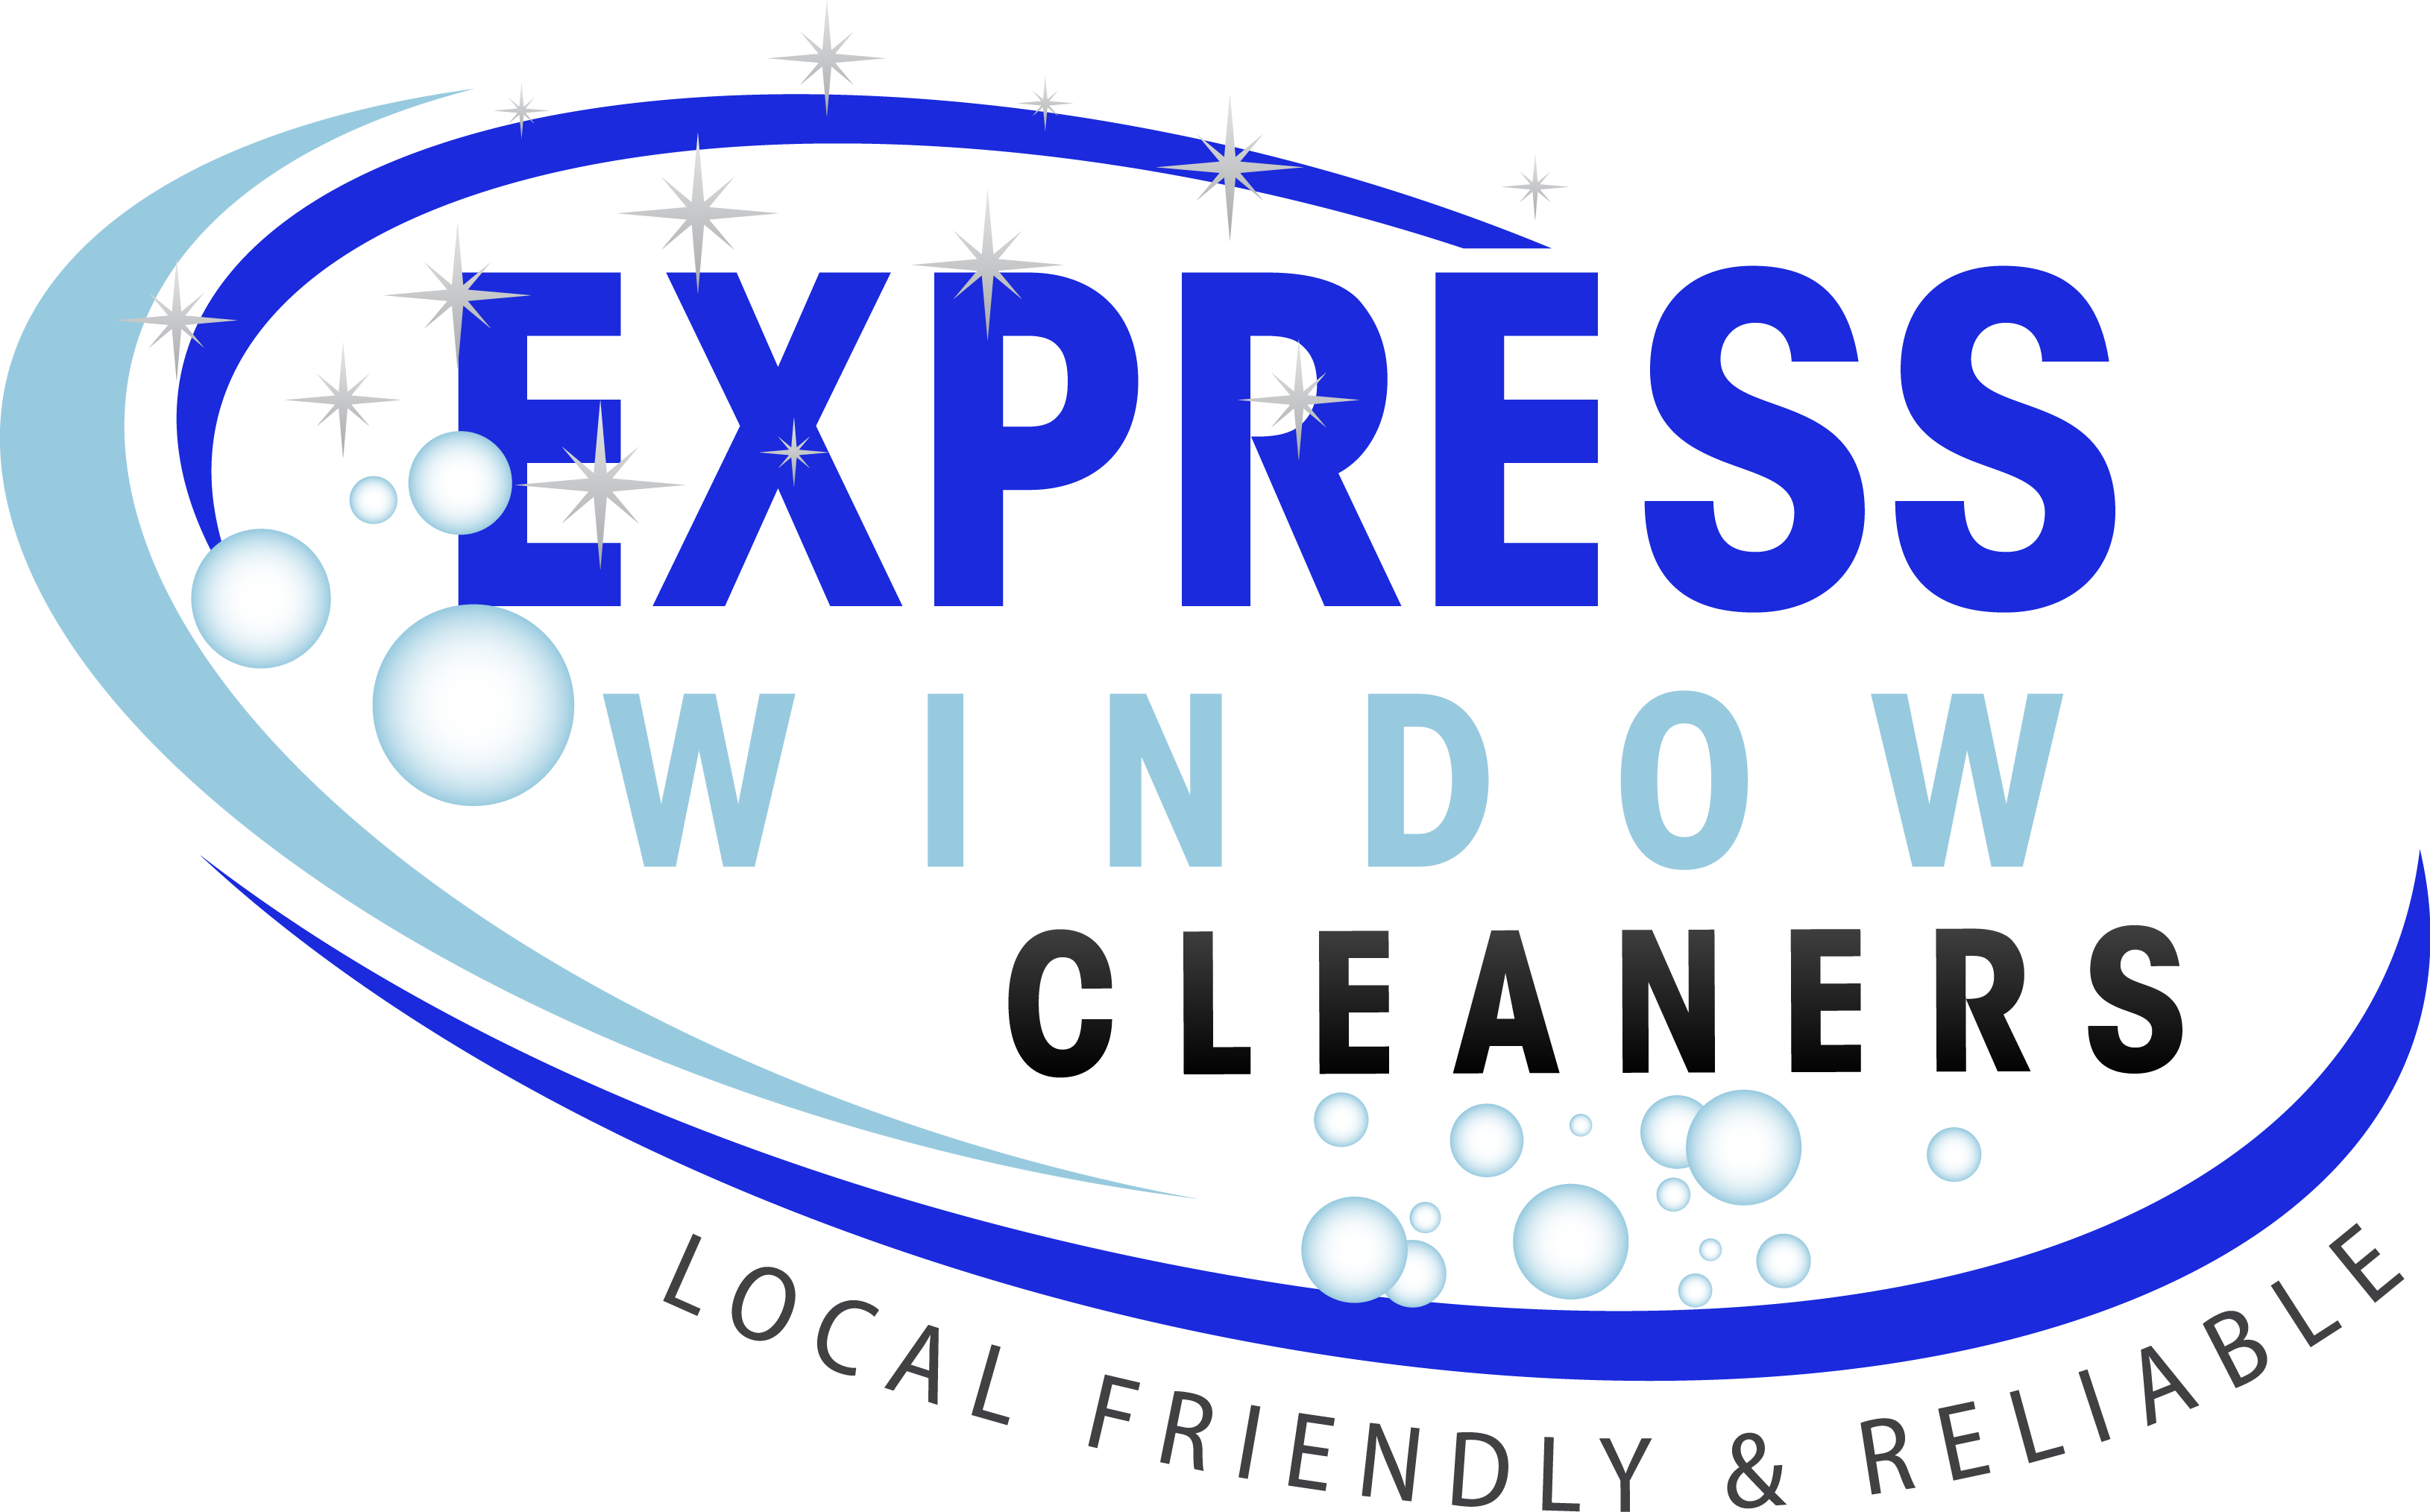 Express Window cleaners in Epping,Loughton,Buckhurst hill area's